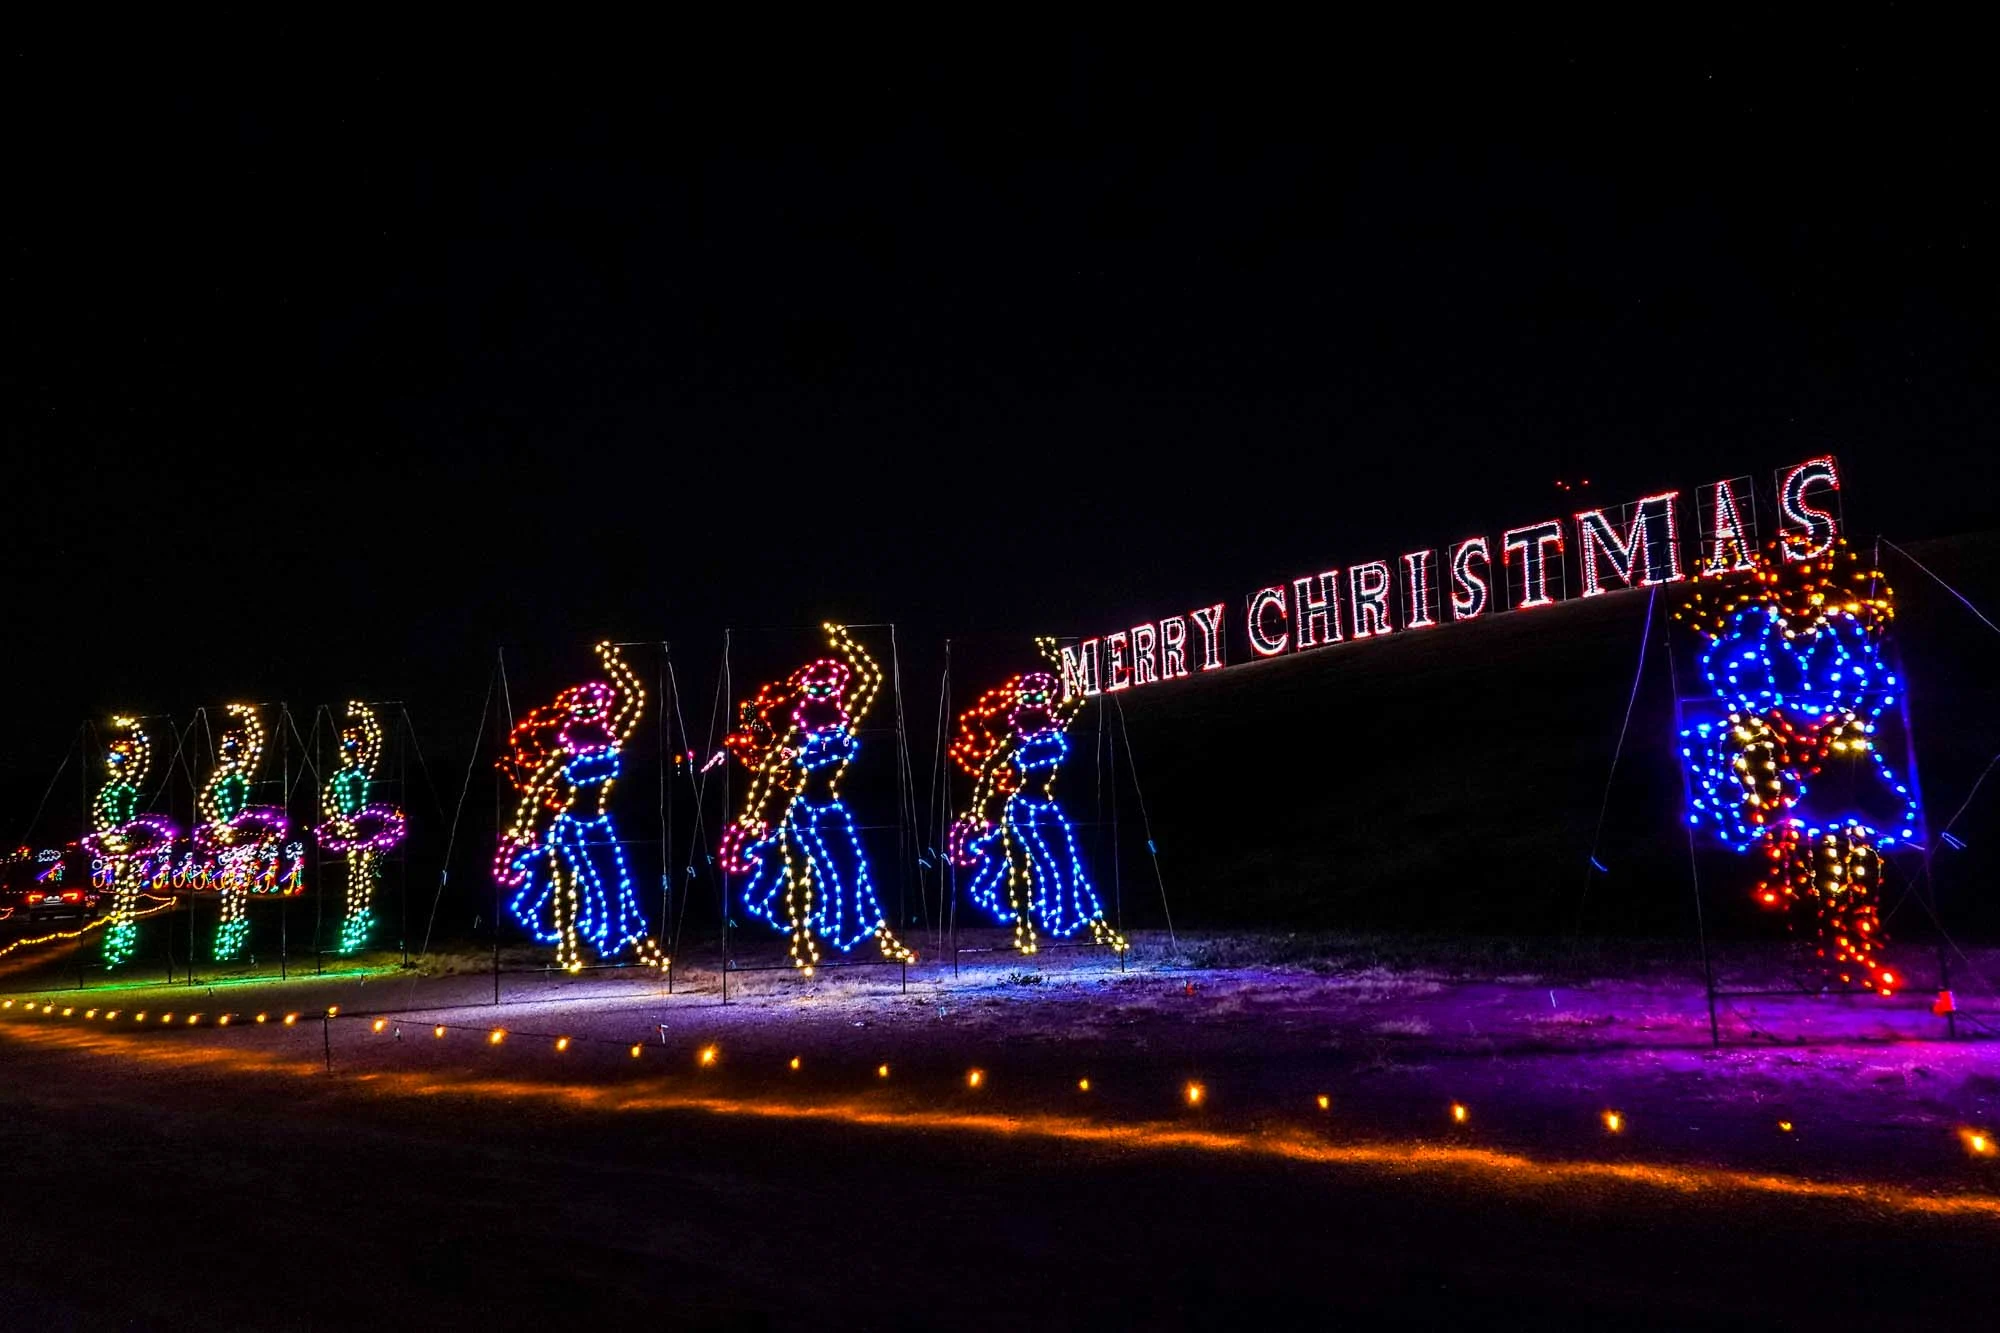 Christmas lights shaped like dancing women in front of a lit up "Merry Christmas" sign.